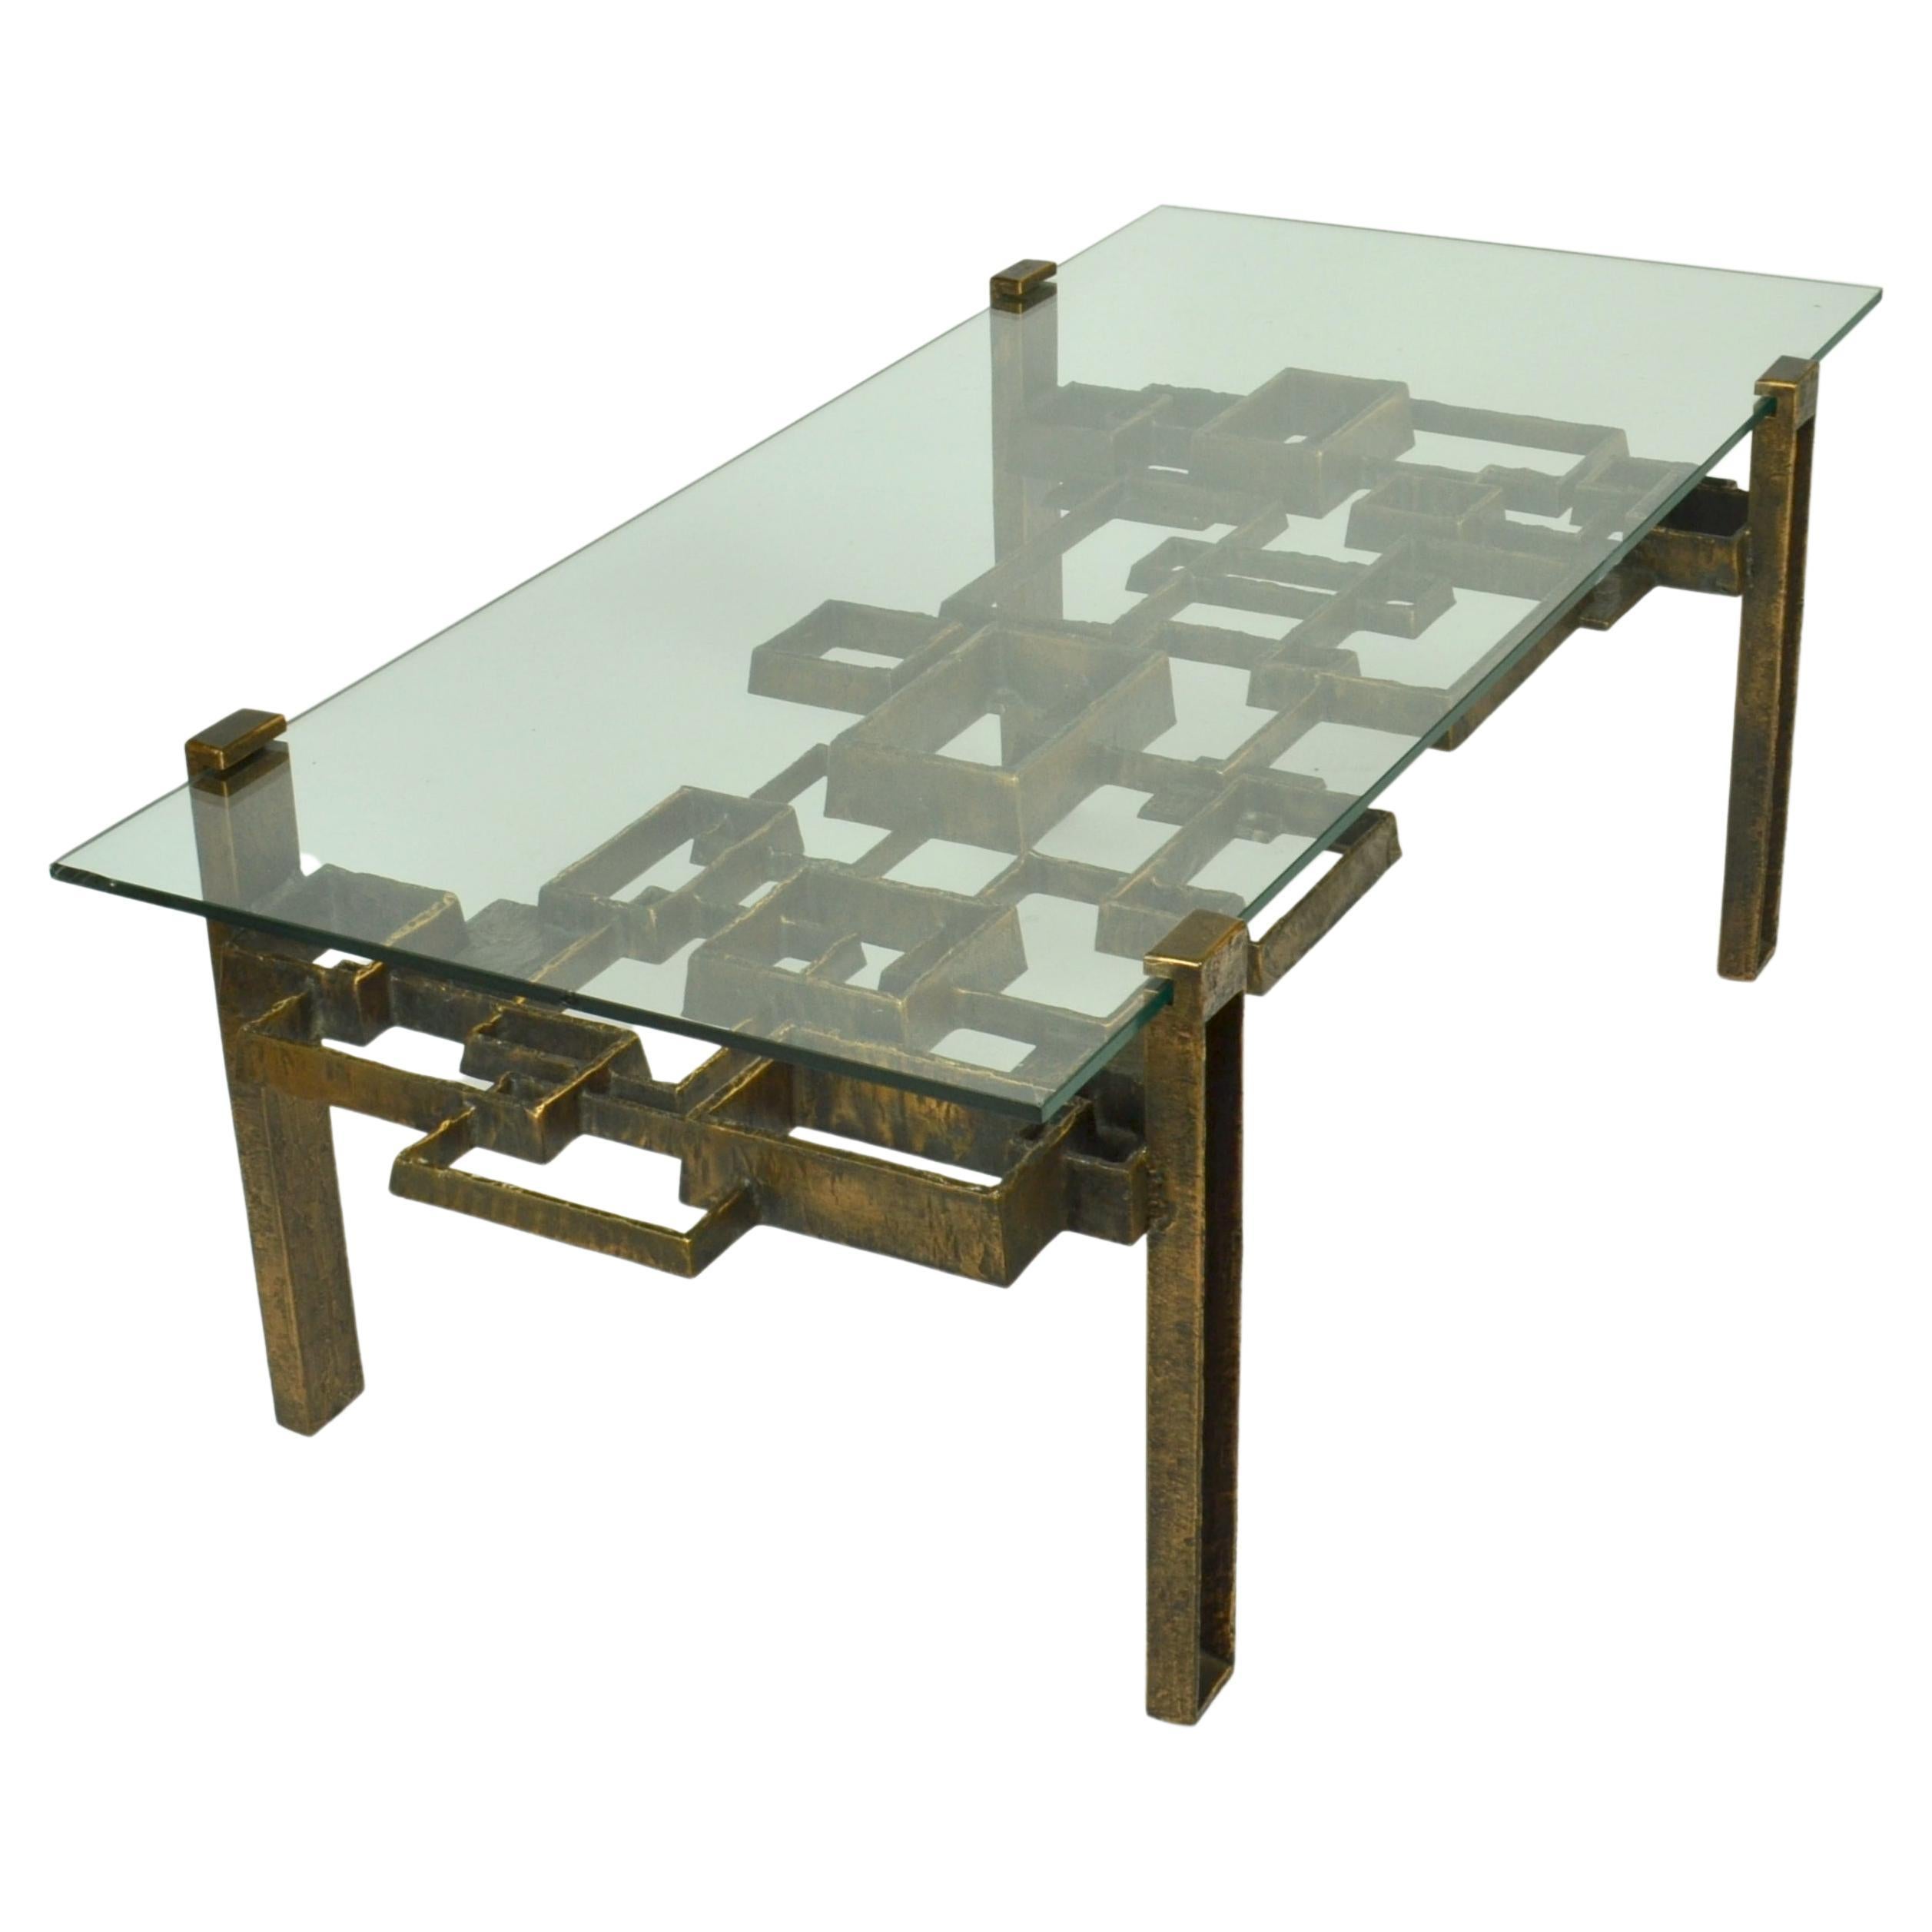 Brutalist Sculpted Bronze Coffee Table with glass Top 1970's For Sale